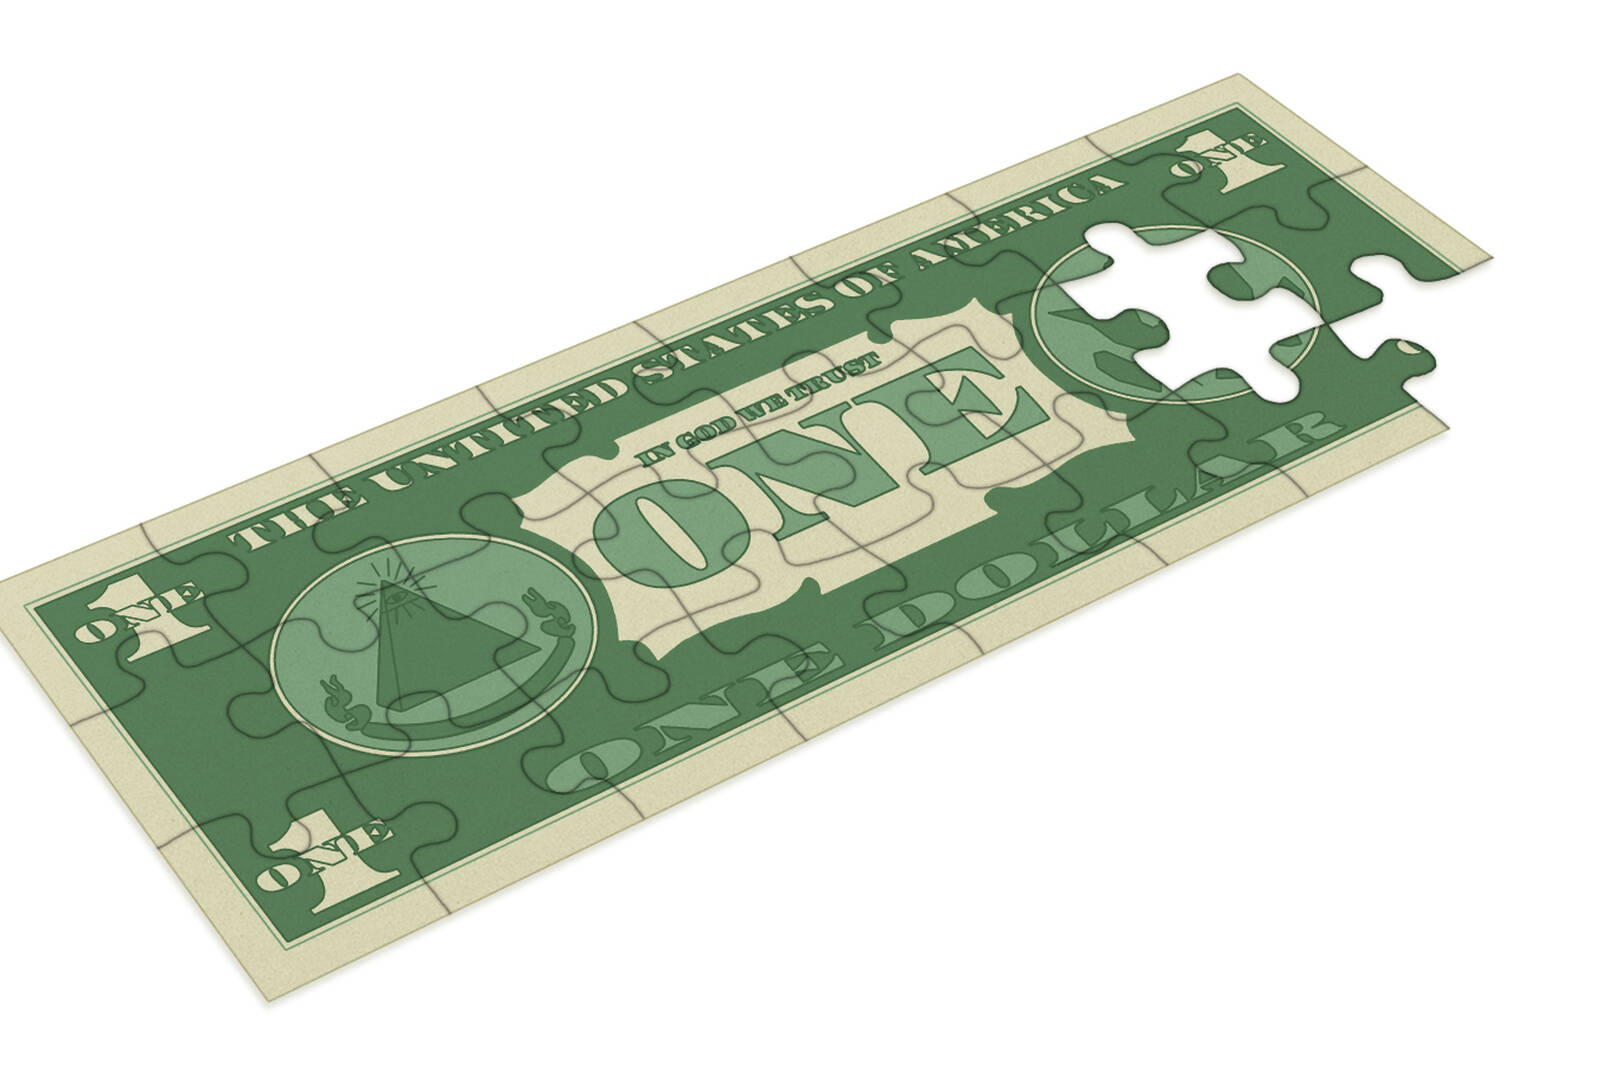 US one dollar bill as puzzle with missing pieces